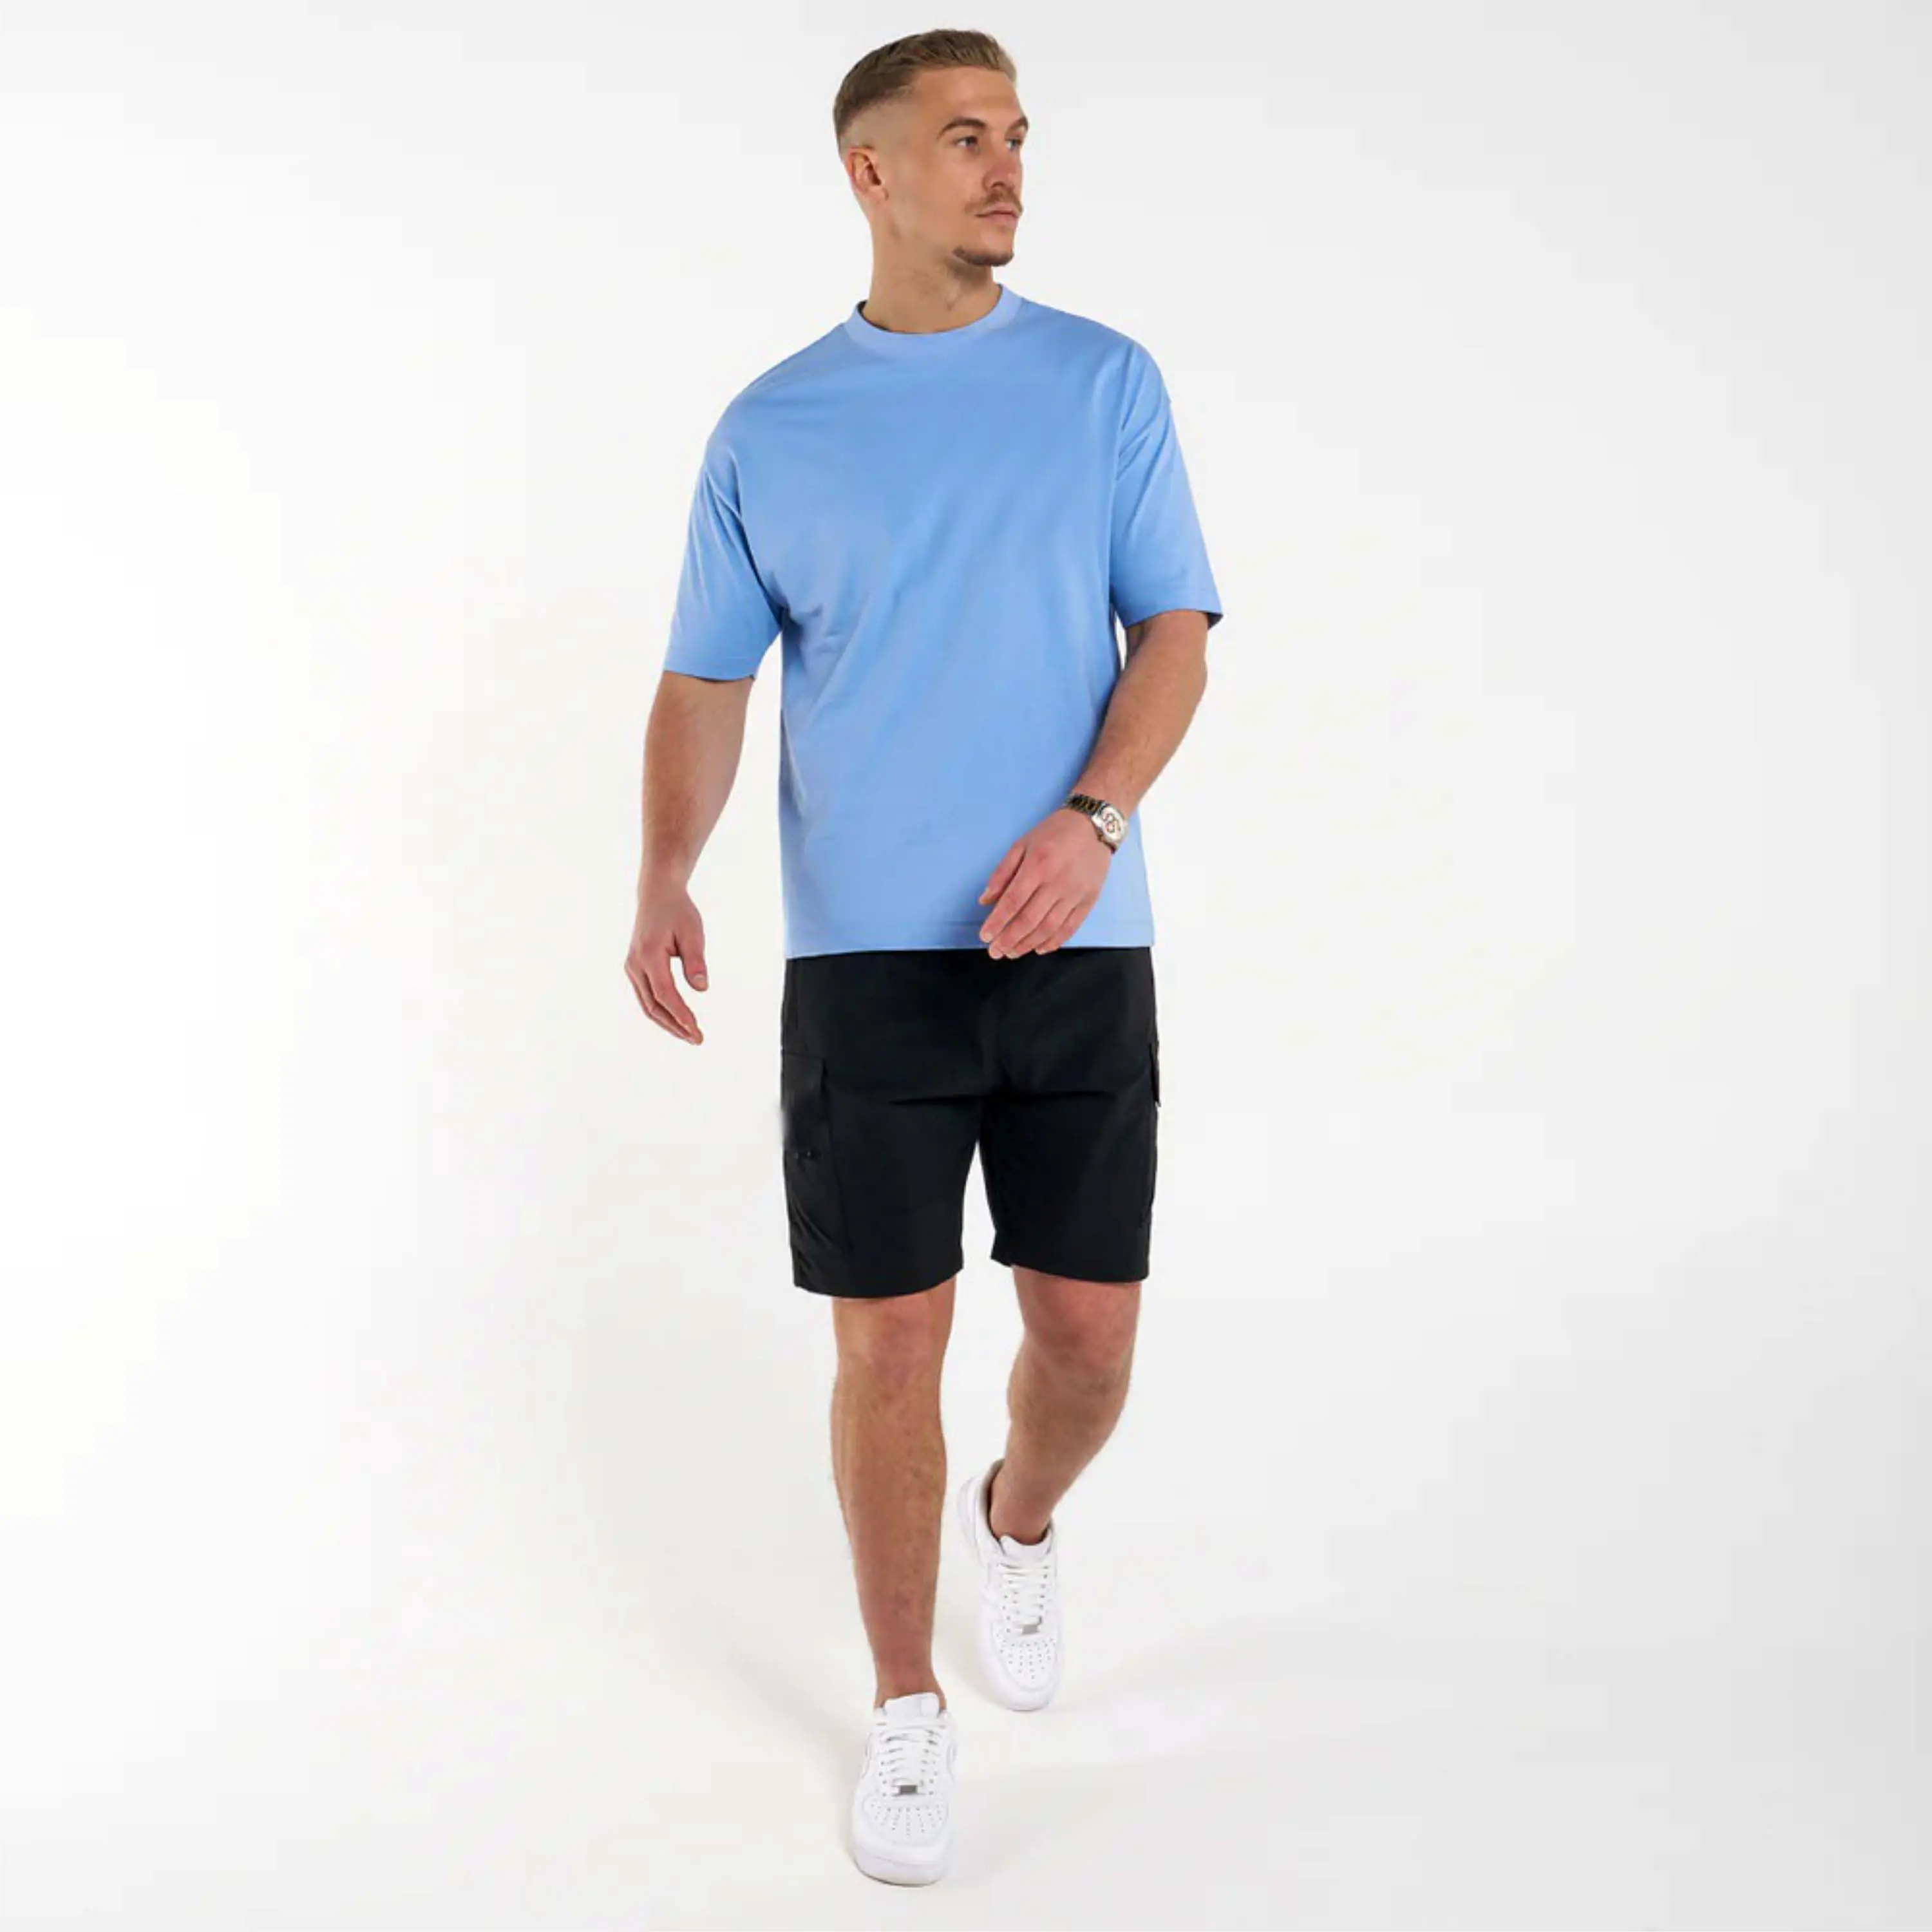 Mens Basic Streetwear Tee - Cotton Blend, Solid Colors Casual Street Tee for Men - Easy Wash, Regular Fit"